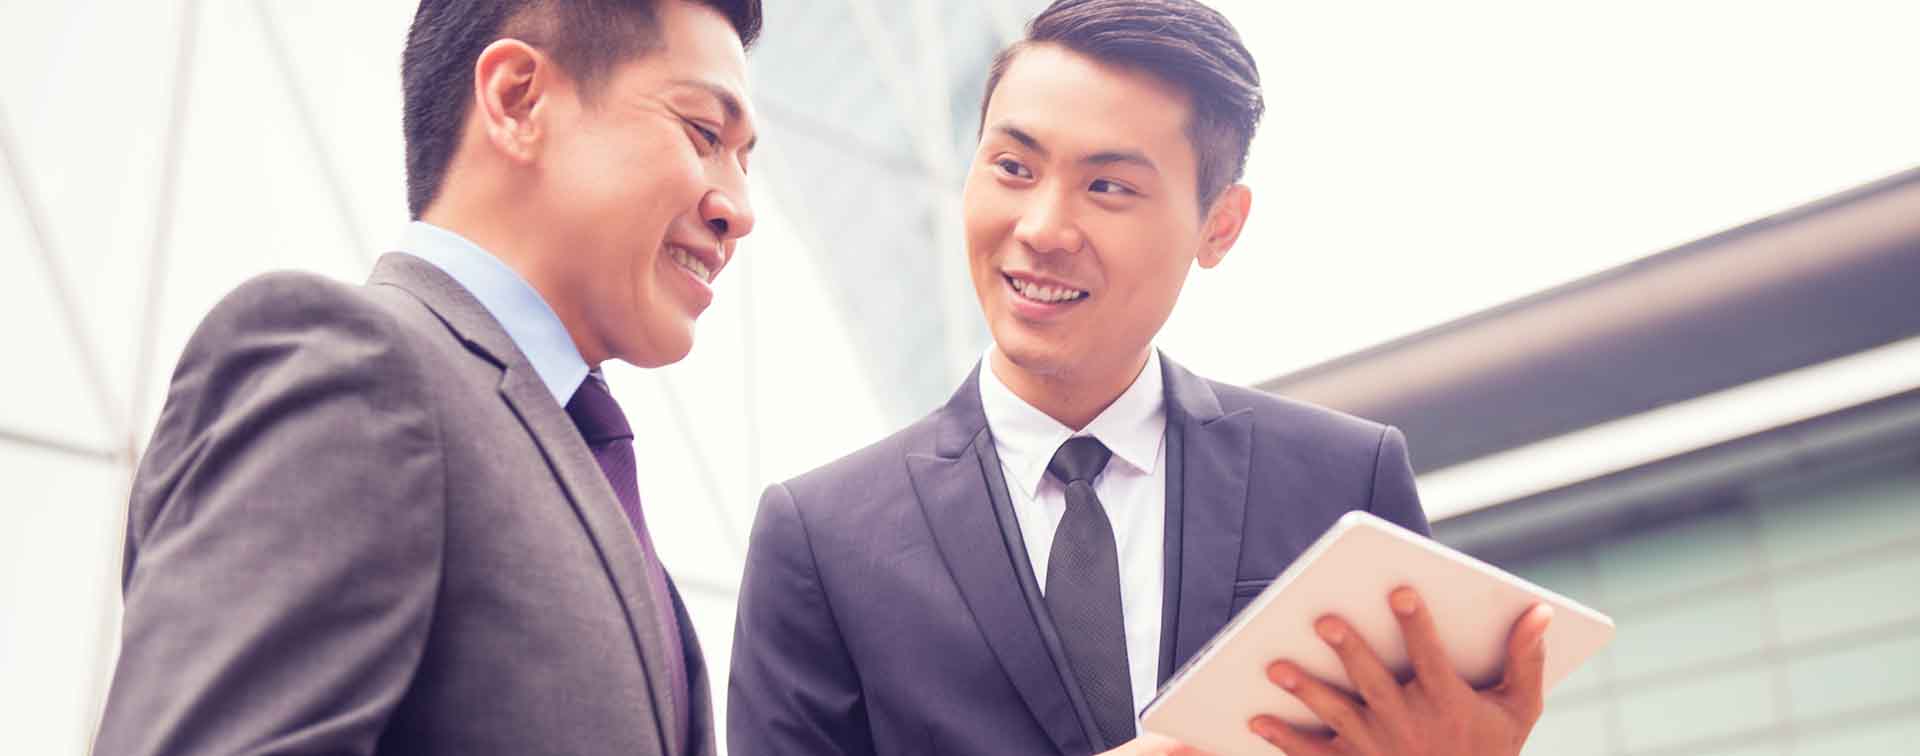 Smiling Chinese businessmen discussing something while one holds a tablet